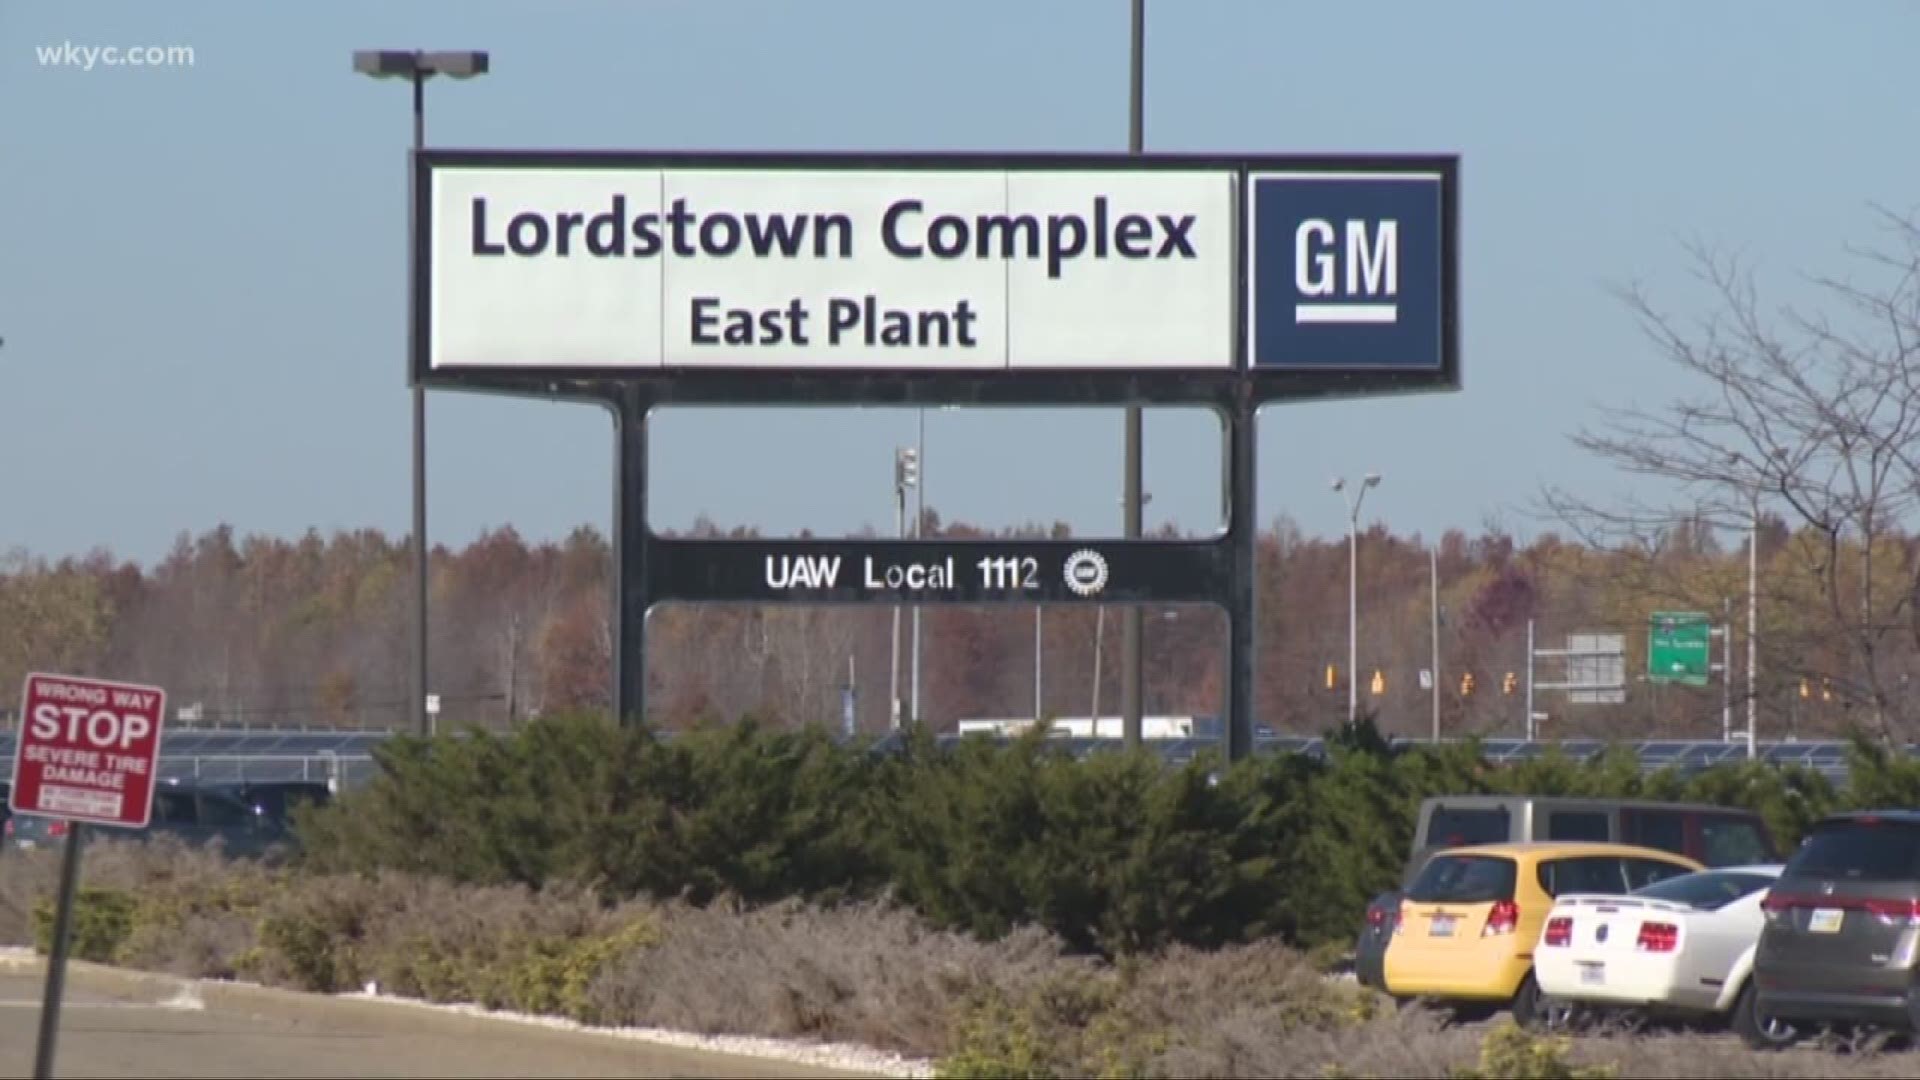 March 8, 2019: The production of at the General Motors Lordstown plant is officially done, putting more than 1,000 workers out of a job. Today, the community is backing these workers with 'True Blue' Friday. The Drive it Home campaign is encouraging everyone to wear blue in support of Union Auto Workers at the now former GM Lordstown plant.